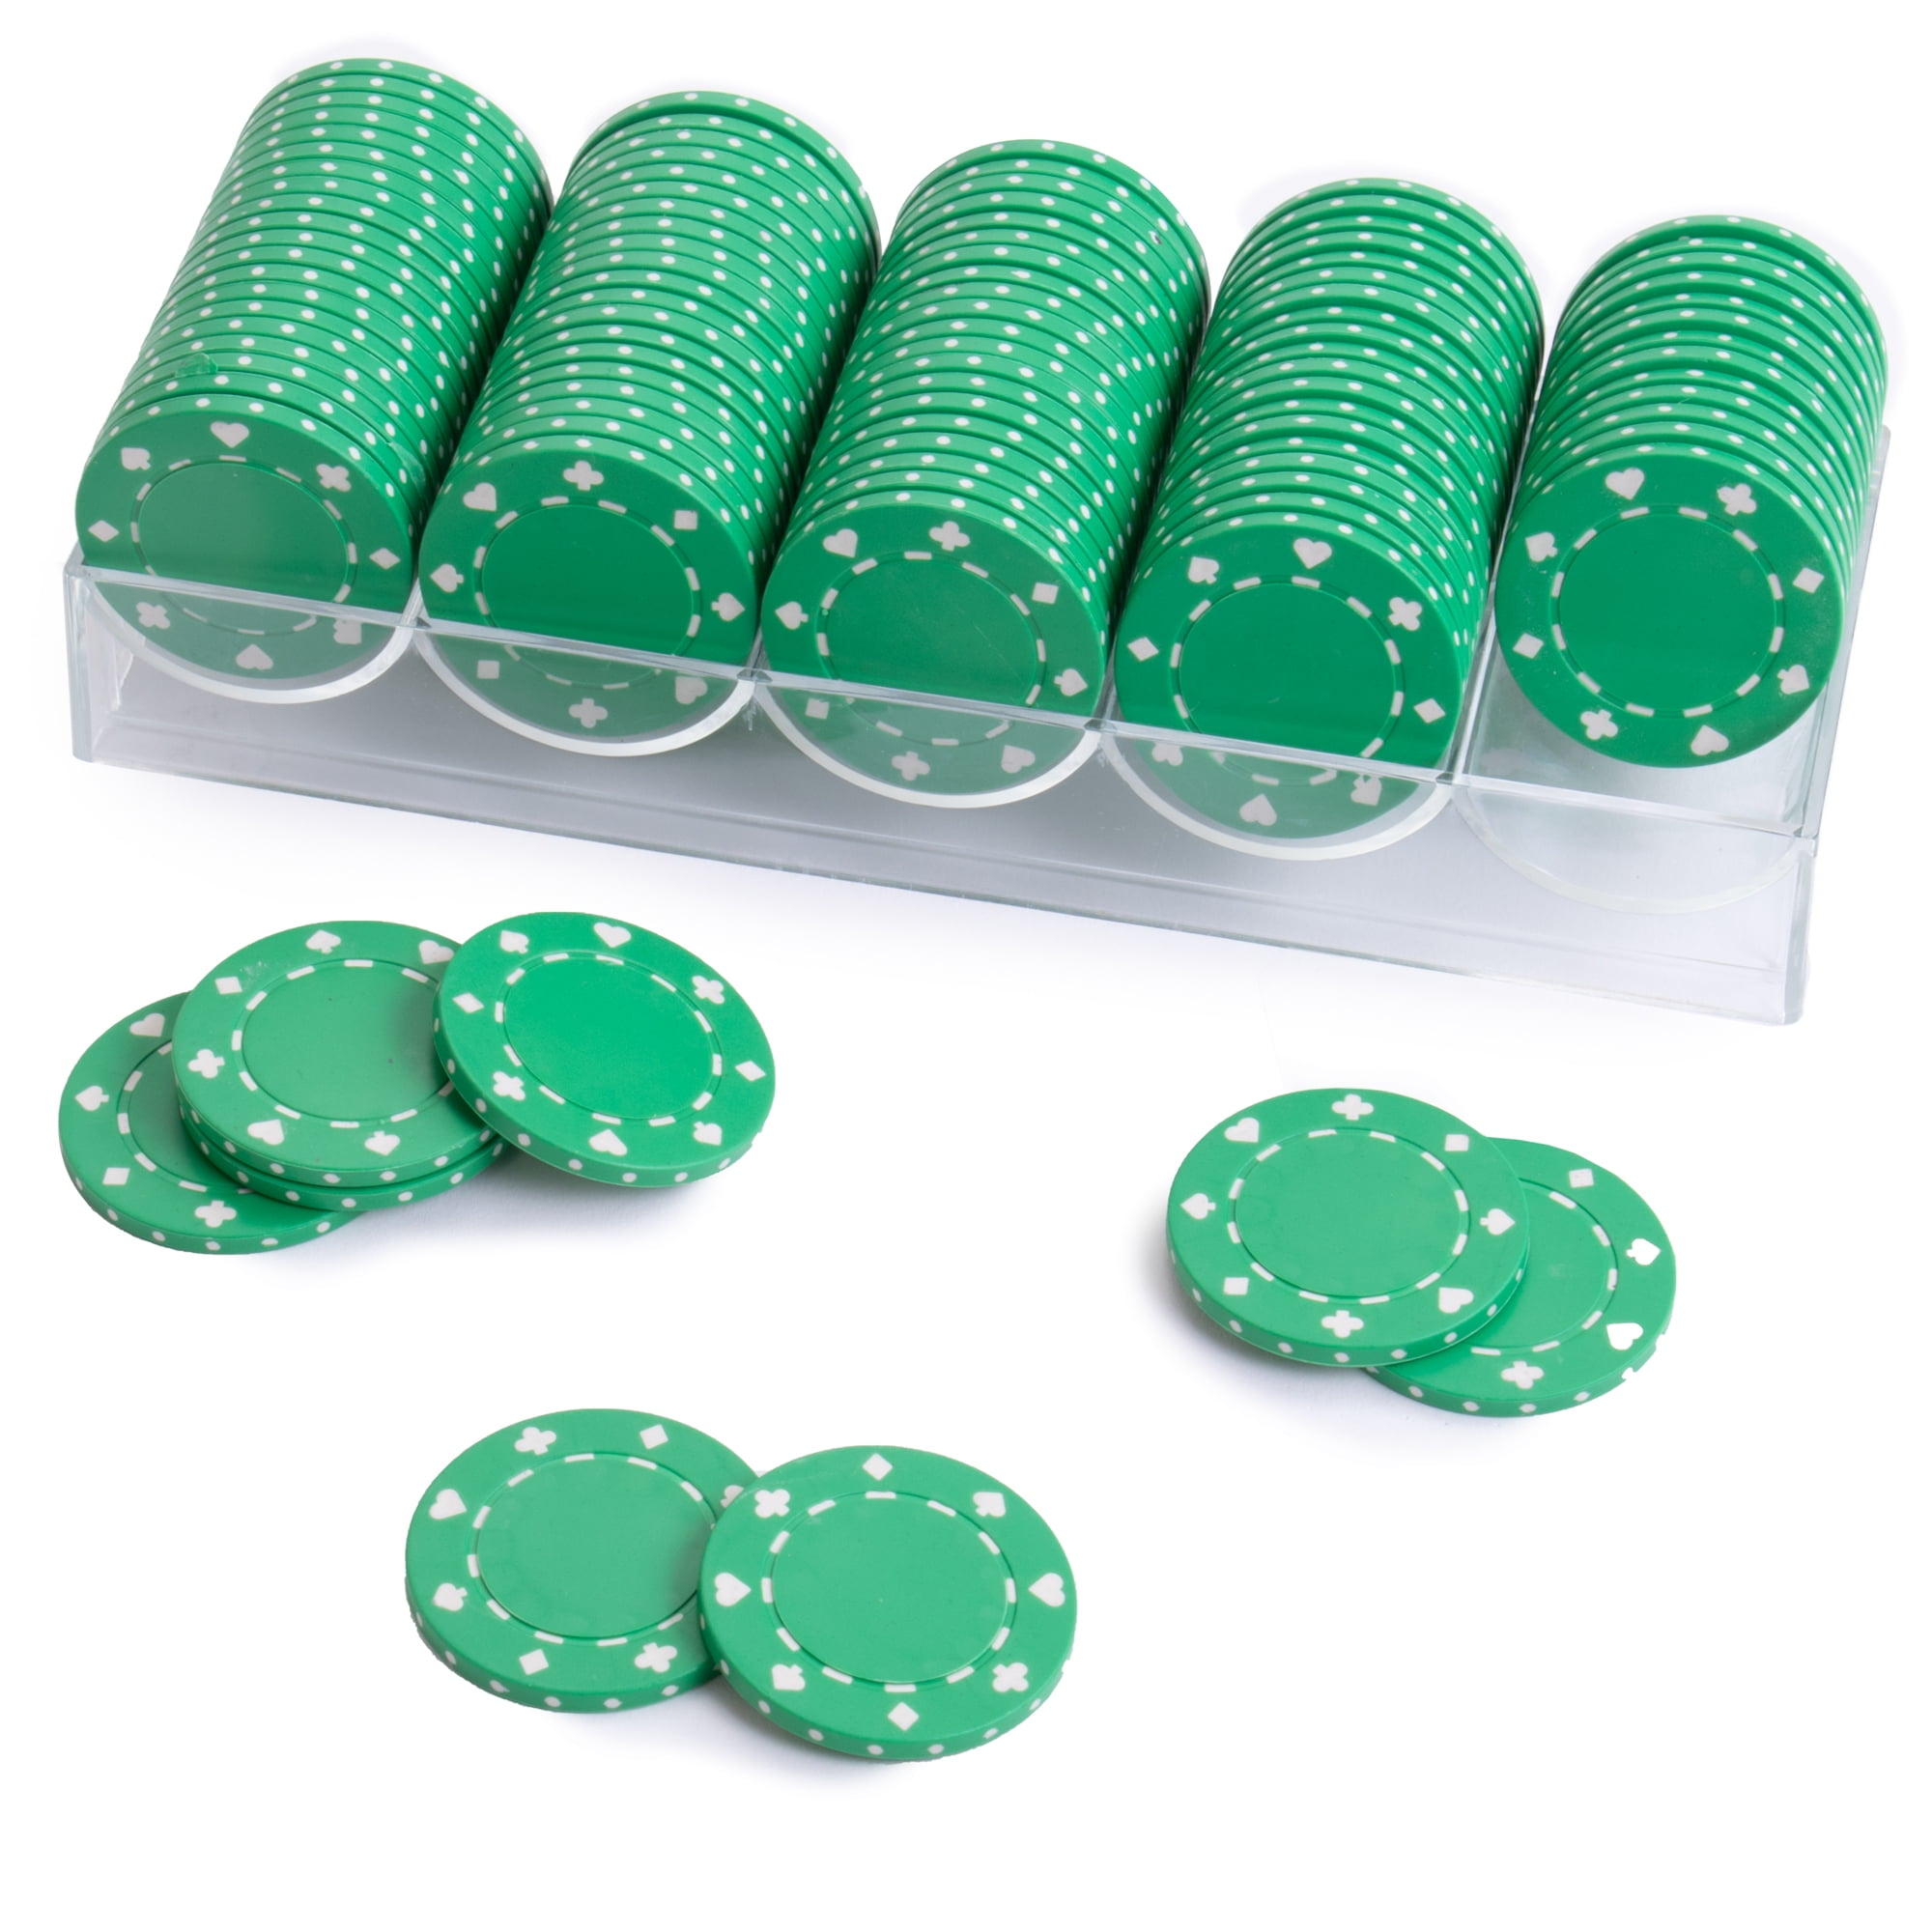 niece tom Fremmedgørelse Rack Me Up Bundle - Clear Acrylic Tray with 100 Pack of Standard Size  Suited Poker Chips, Choose Your Color - Lightweight Casino Bulk Game  Accessories with Holder - Counting Bingo Markers - Walmart.com